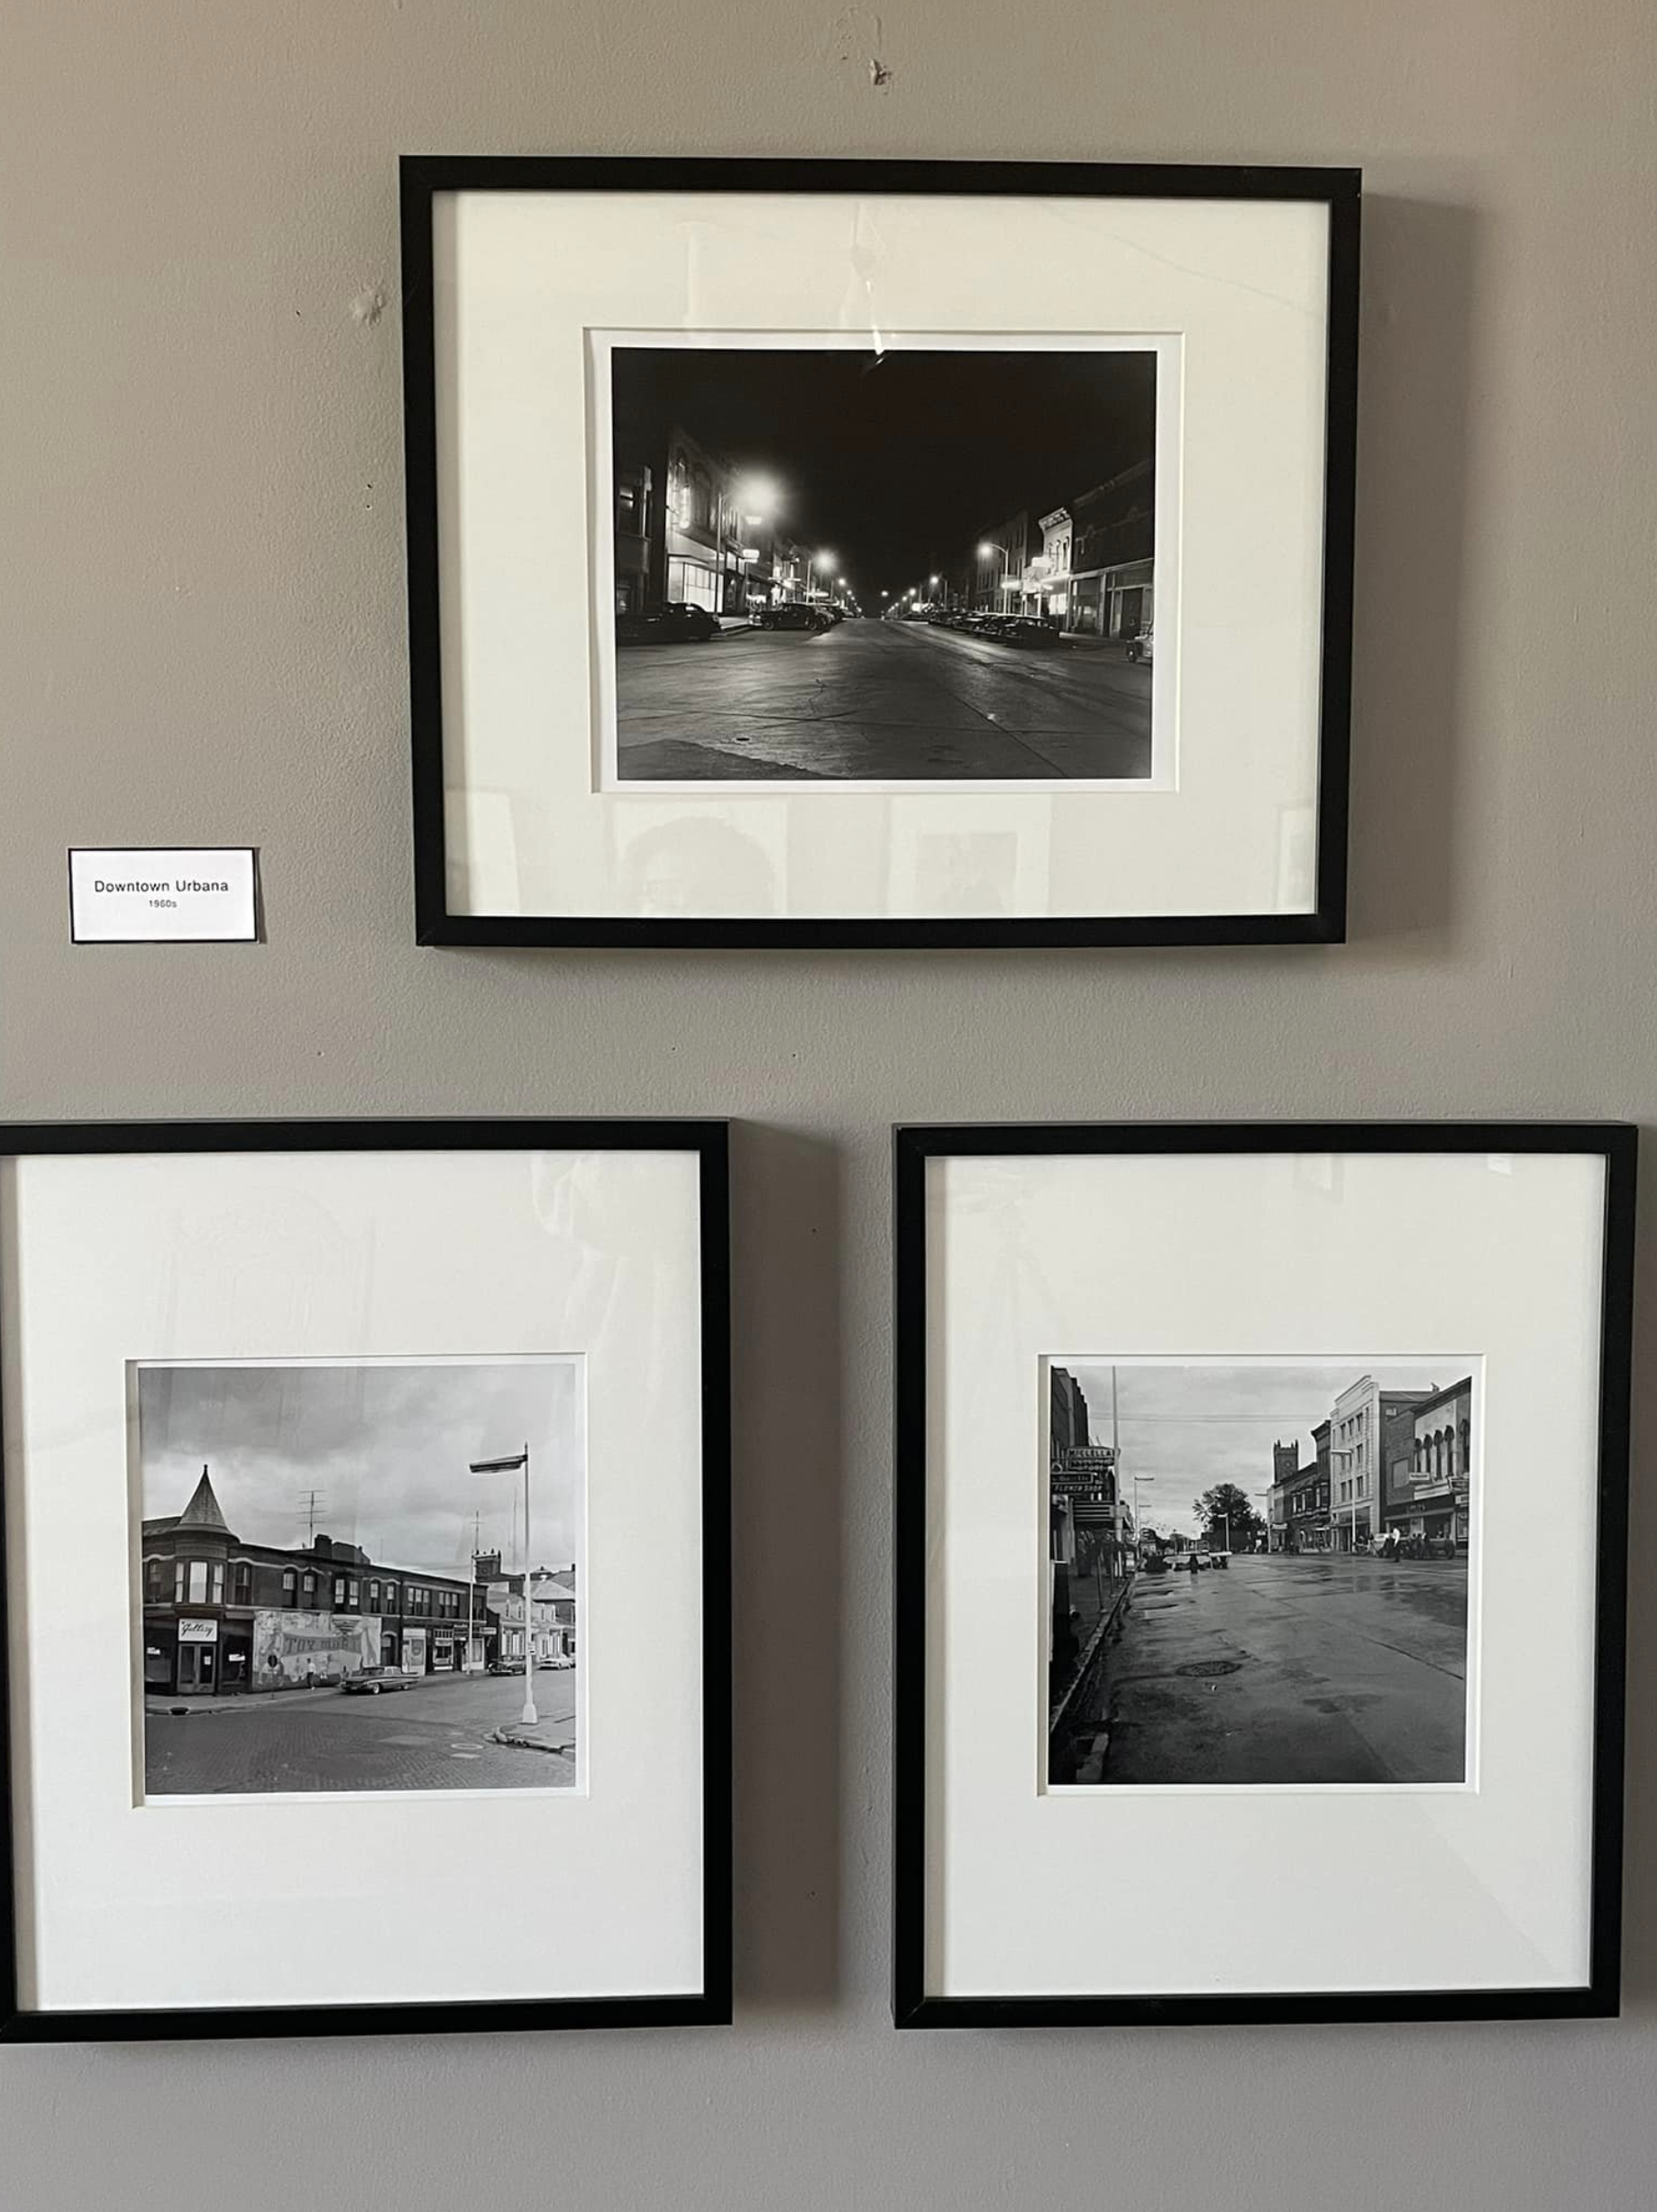 Photos from the Downtown Urbana series taken by a Courier staff photographer during the 1960s.